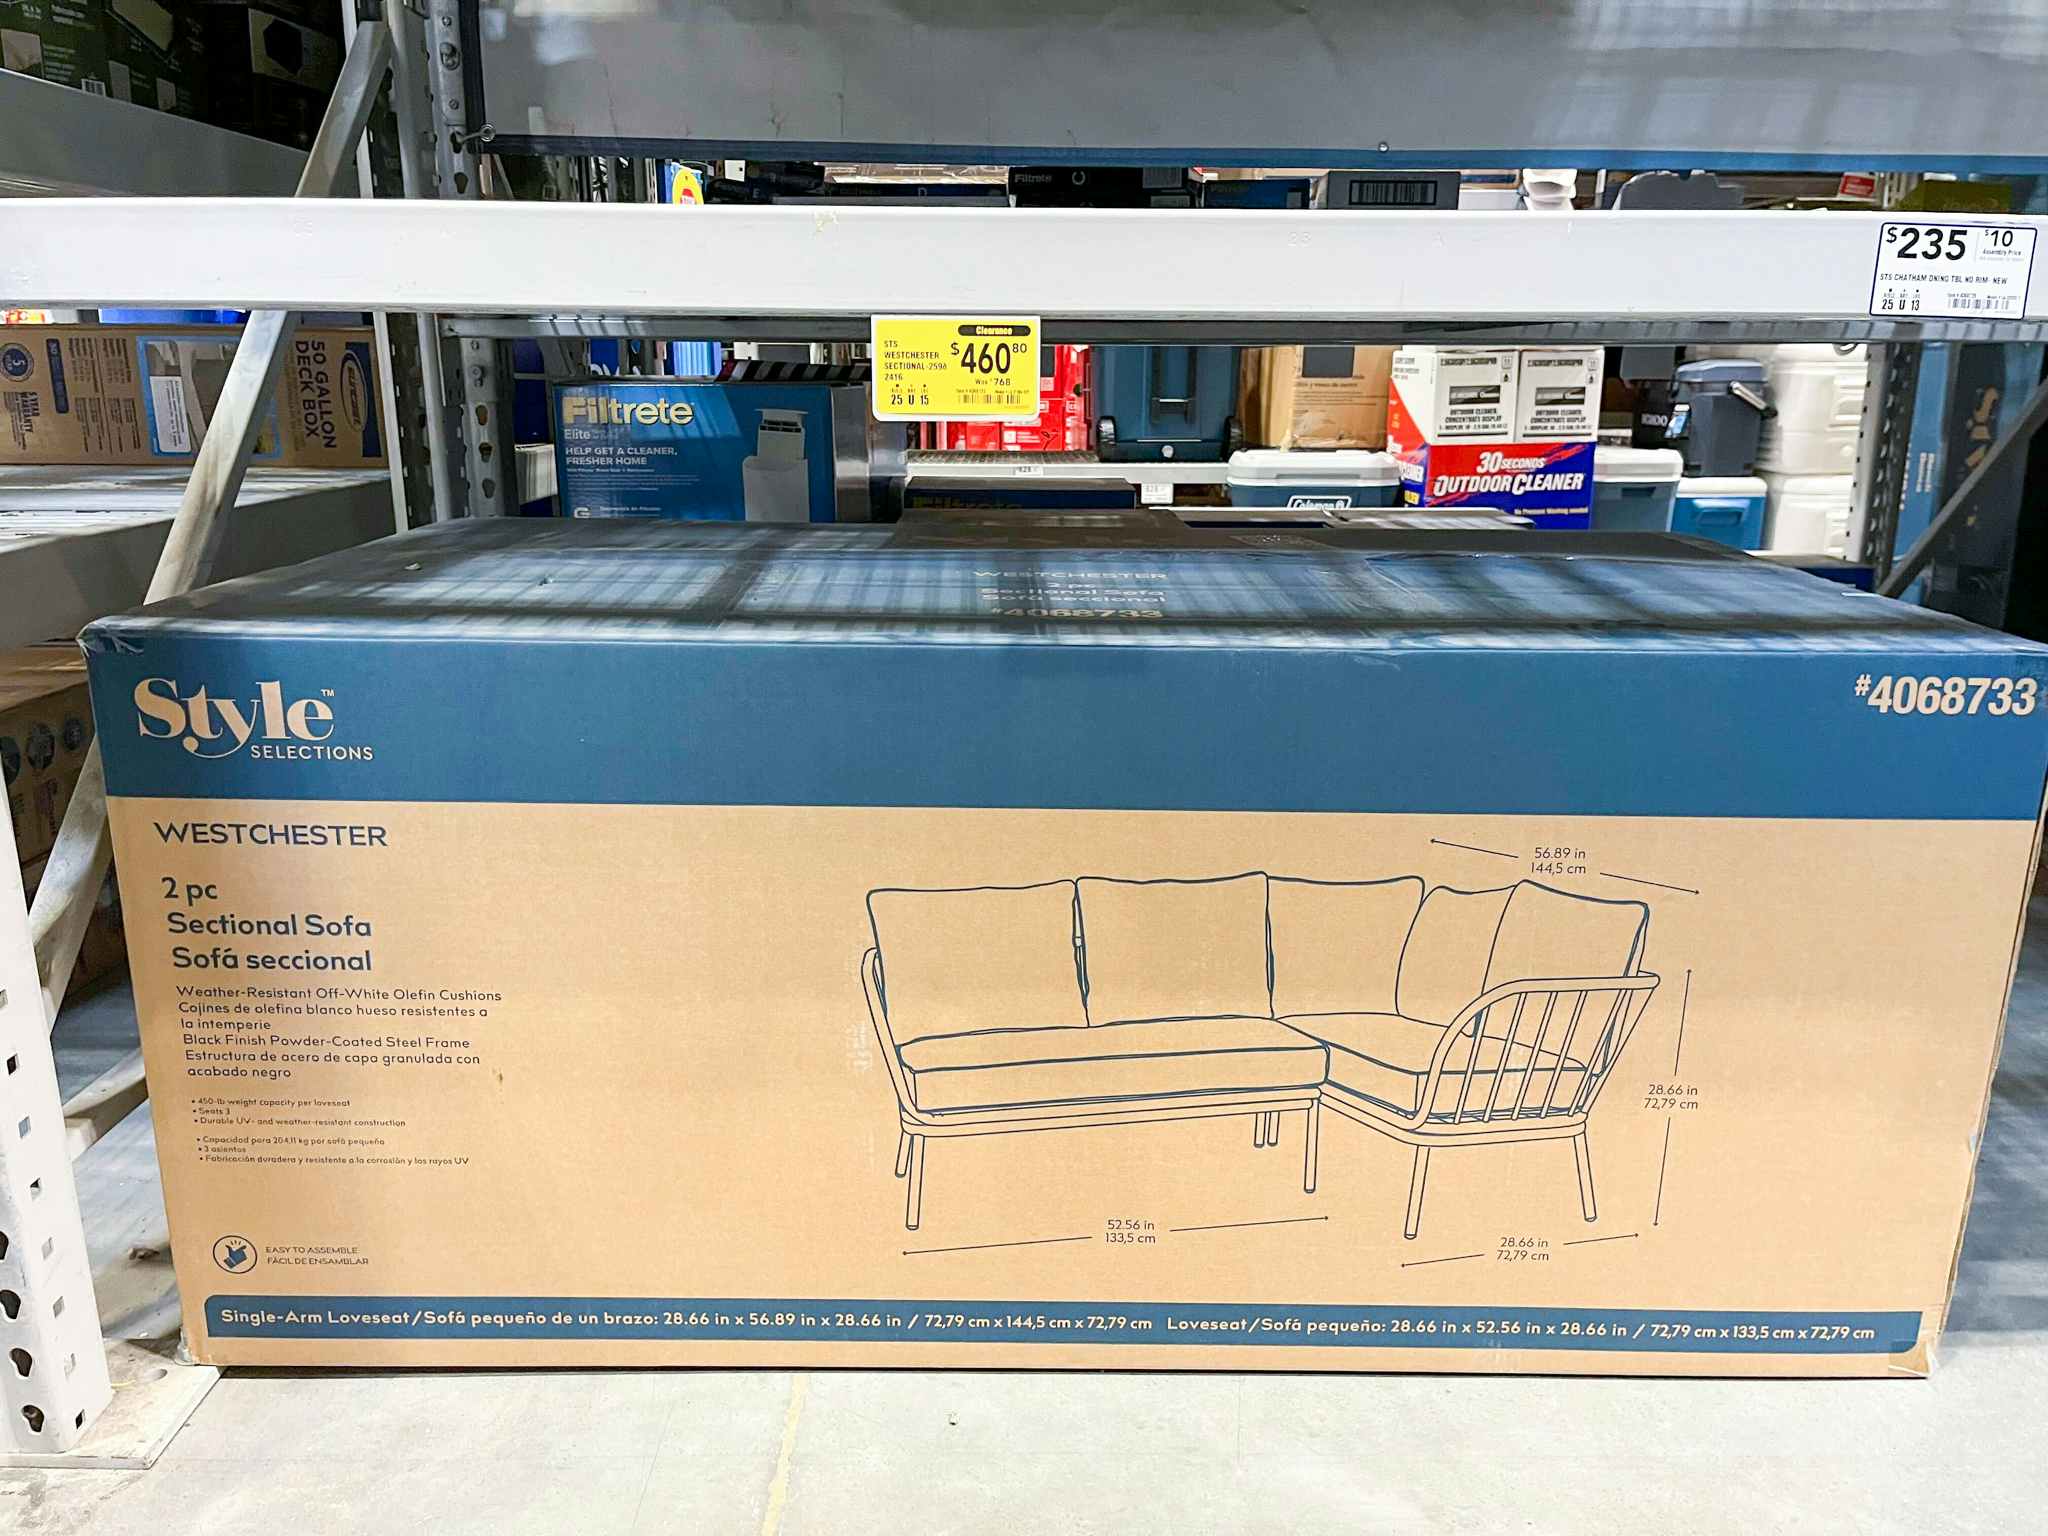 style selections westchester sectional sofa on clearance at lowes